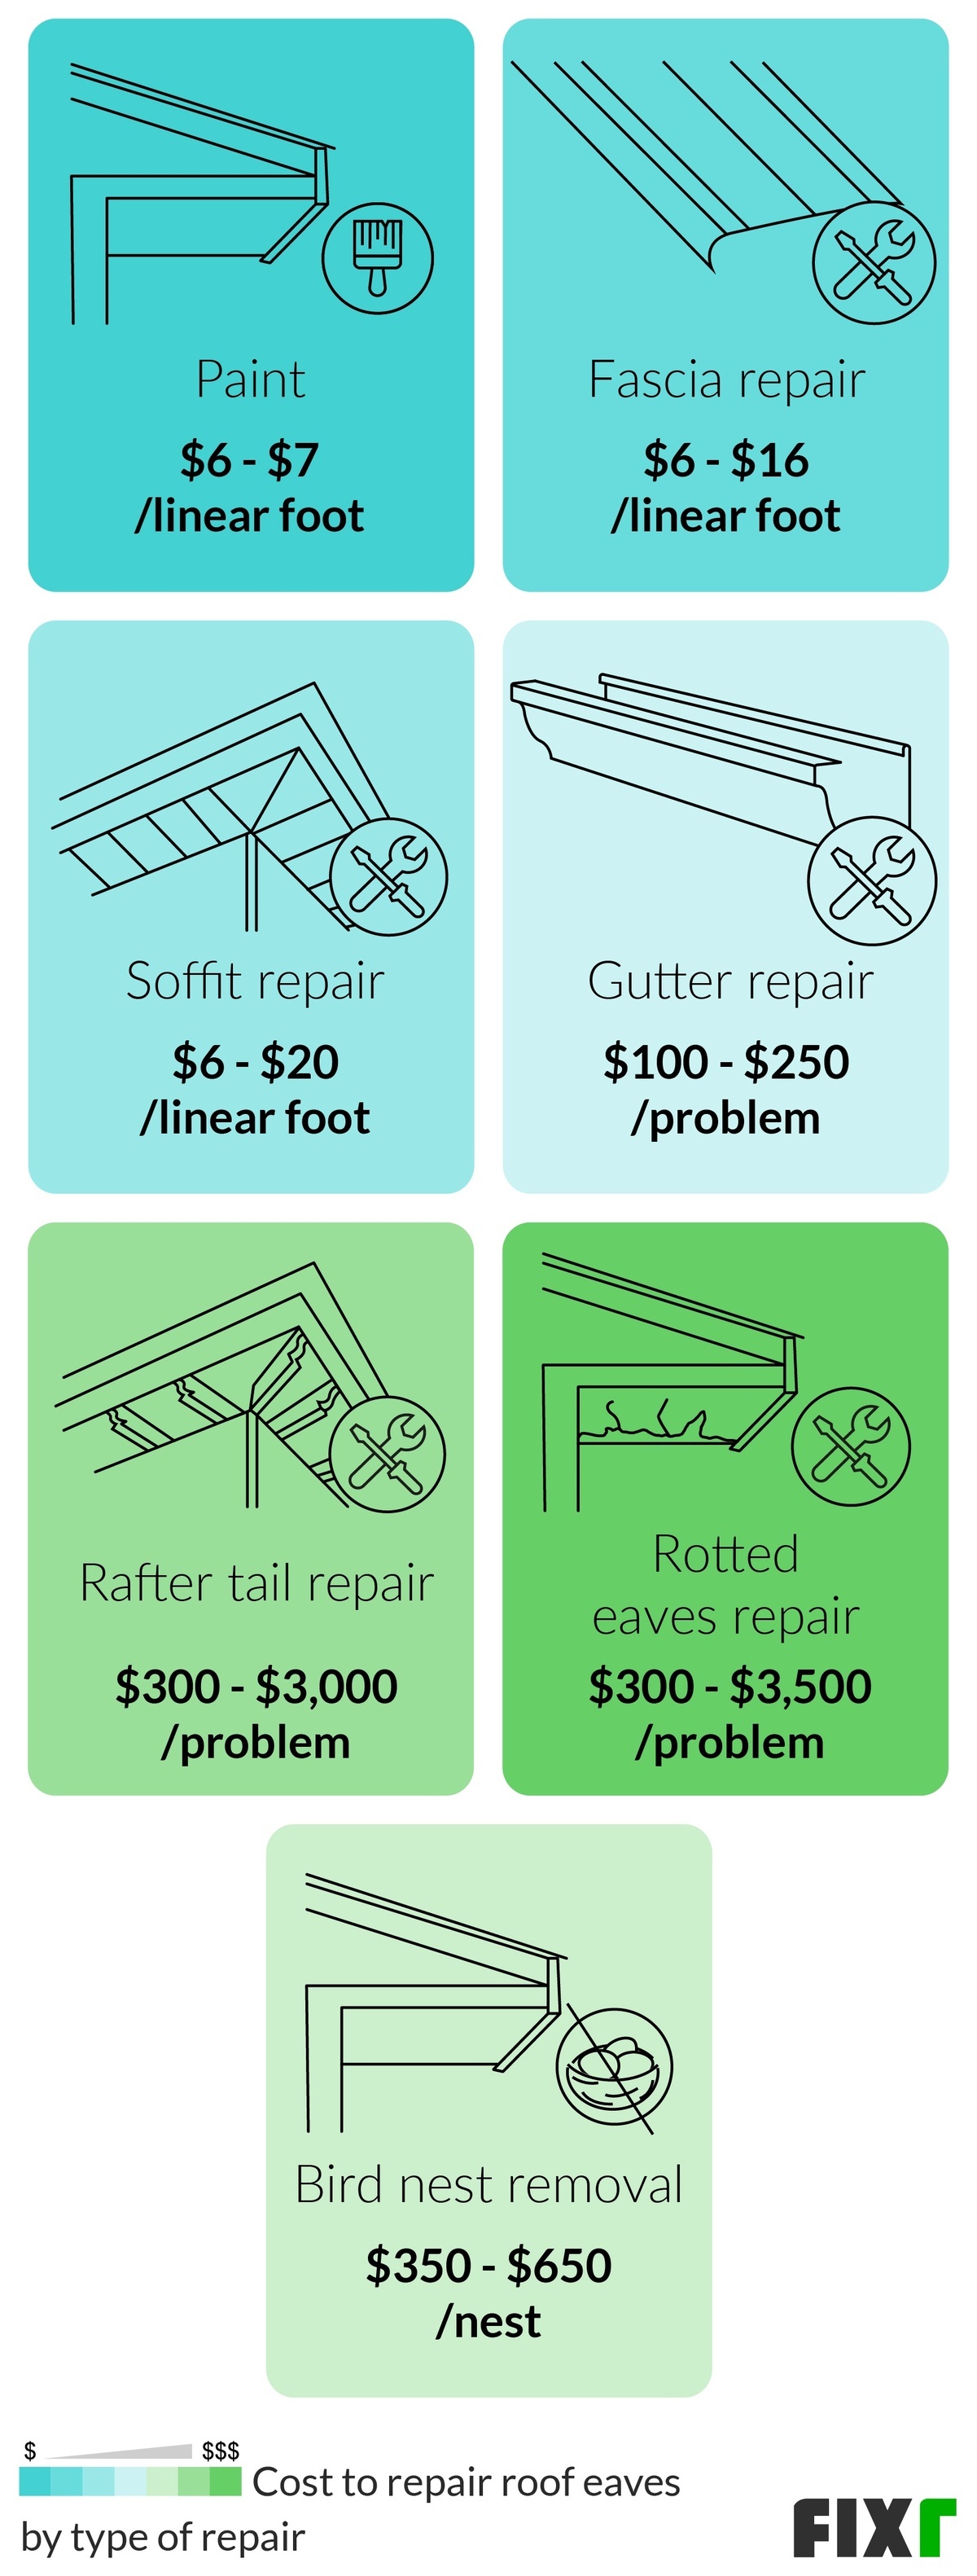 Cost to Repair Roof Eaves by Type of Repair: Paint, Fascia, Soffit, Gutter, Rafter Tail and Rotted Eaves Repair, and Birds Nest Removal